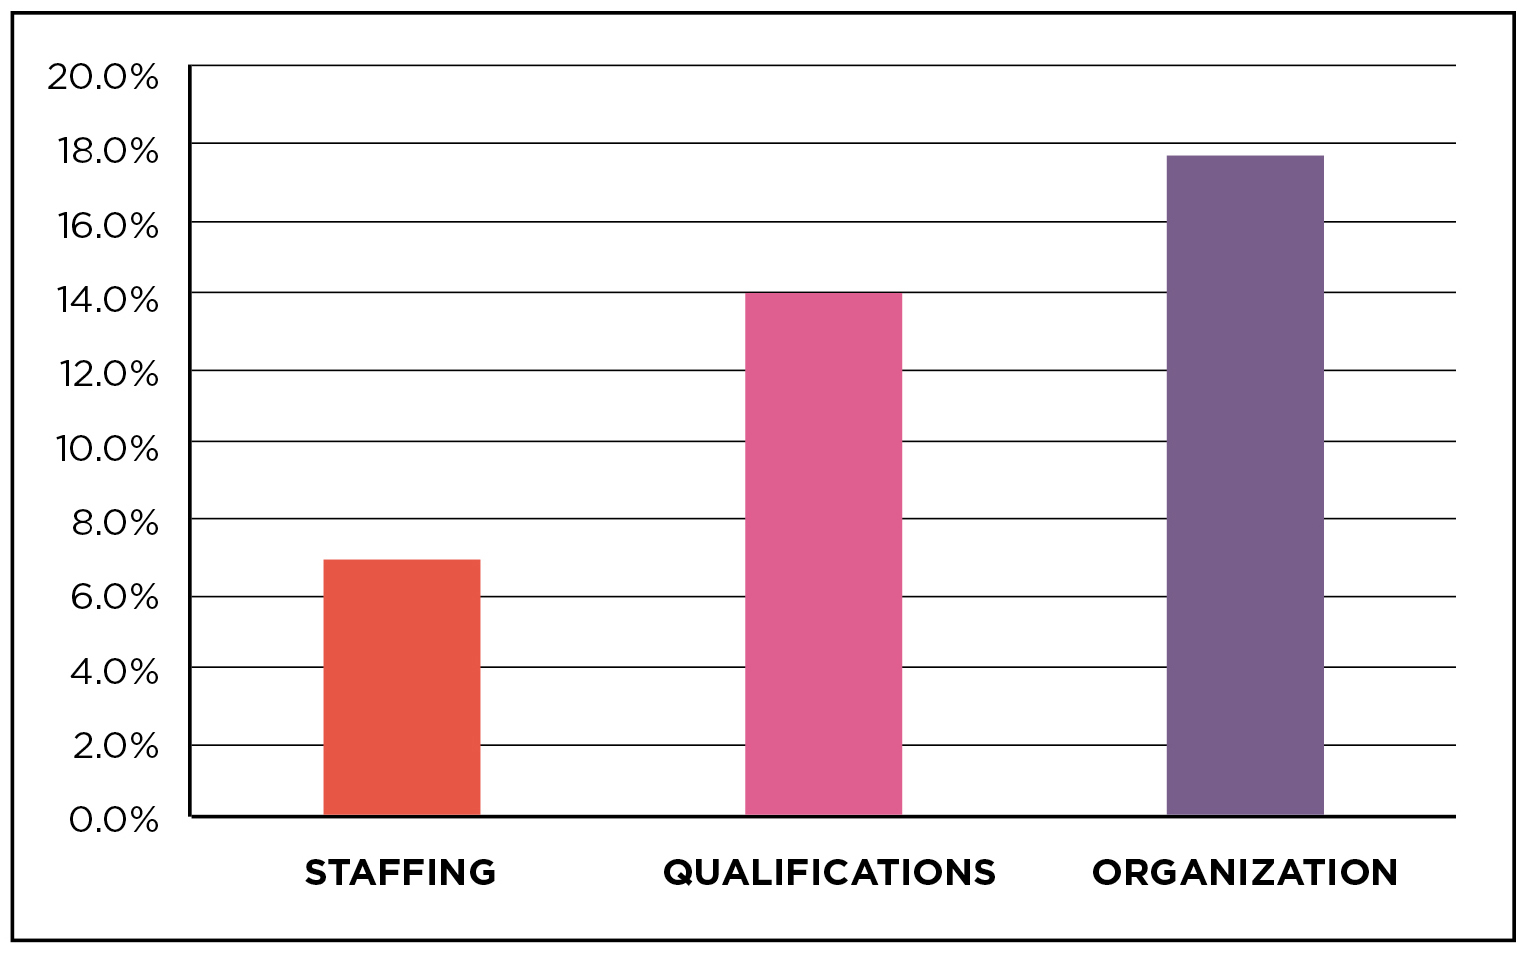 Figure 3. Ineffective behaviors in the areas of staffing, qualifications, and organization.